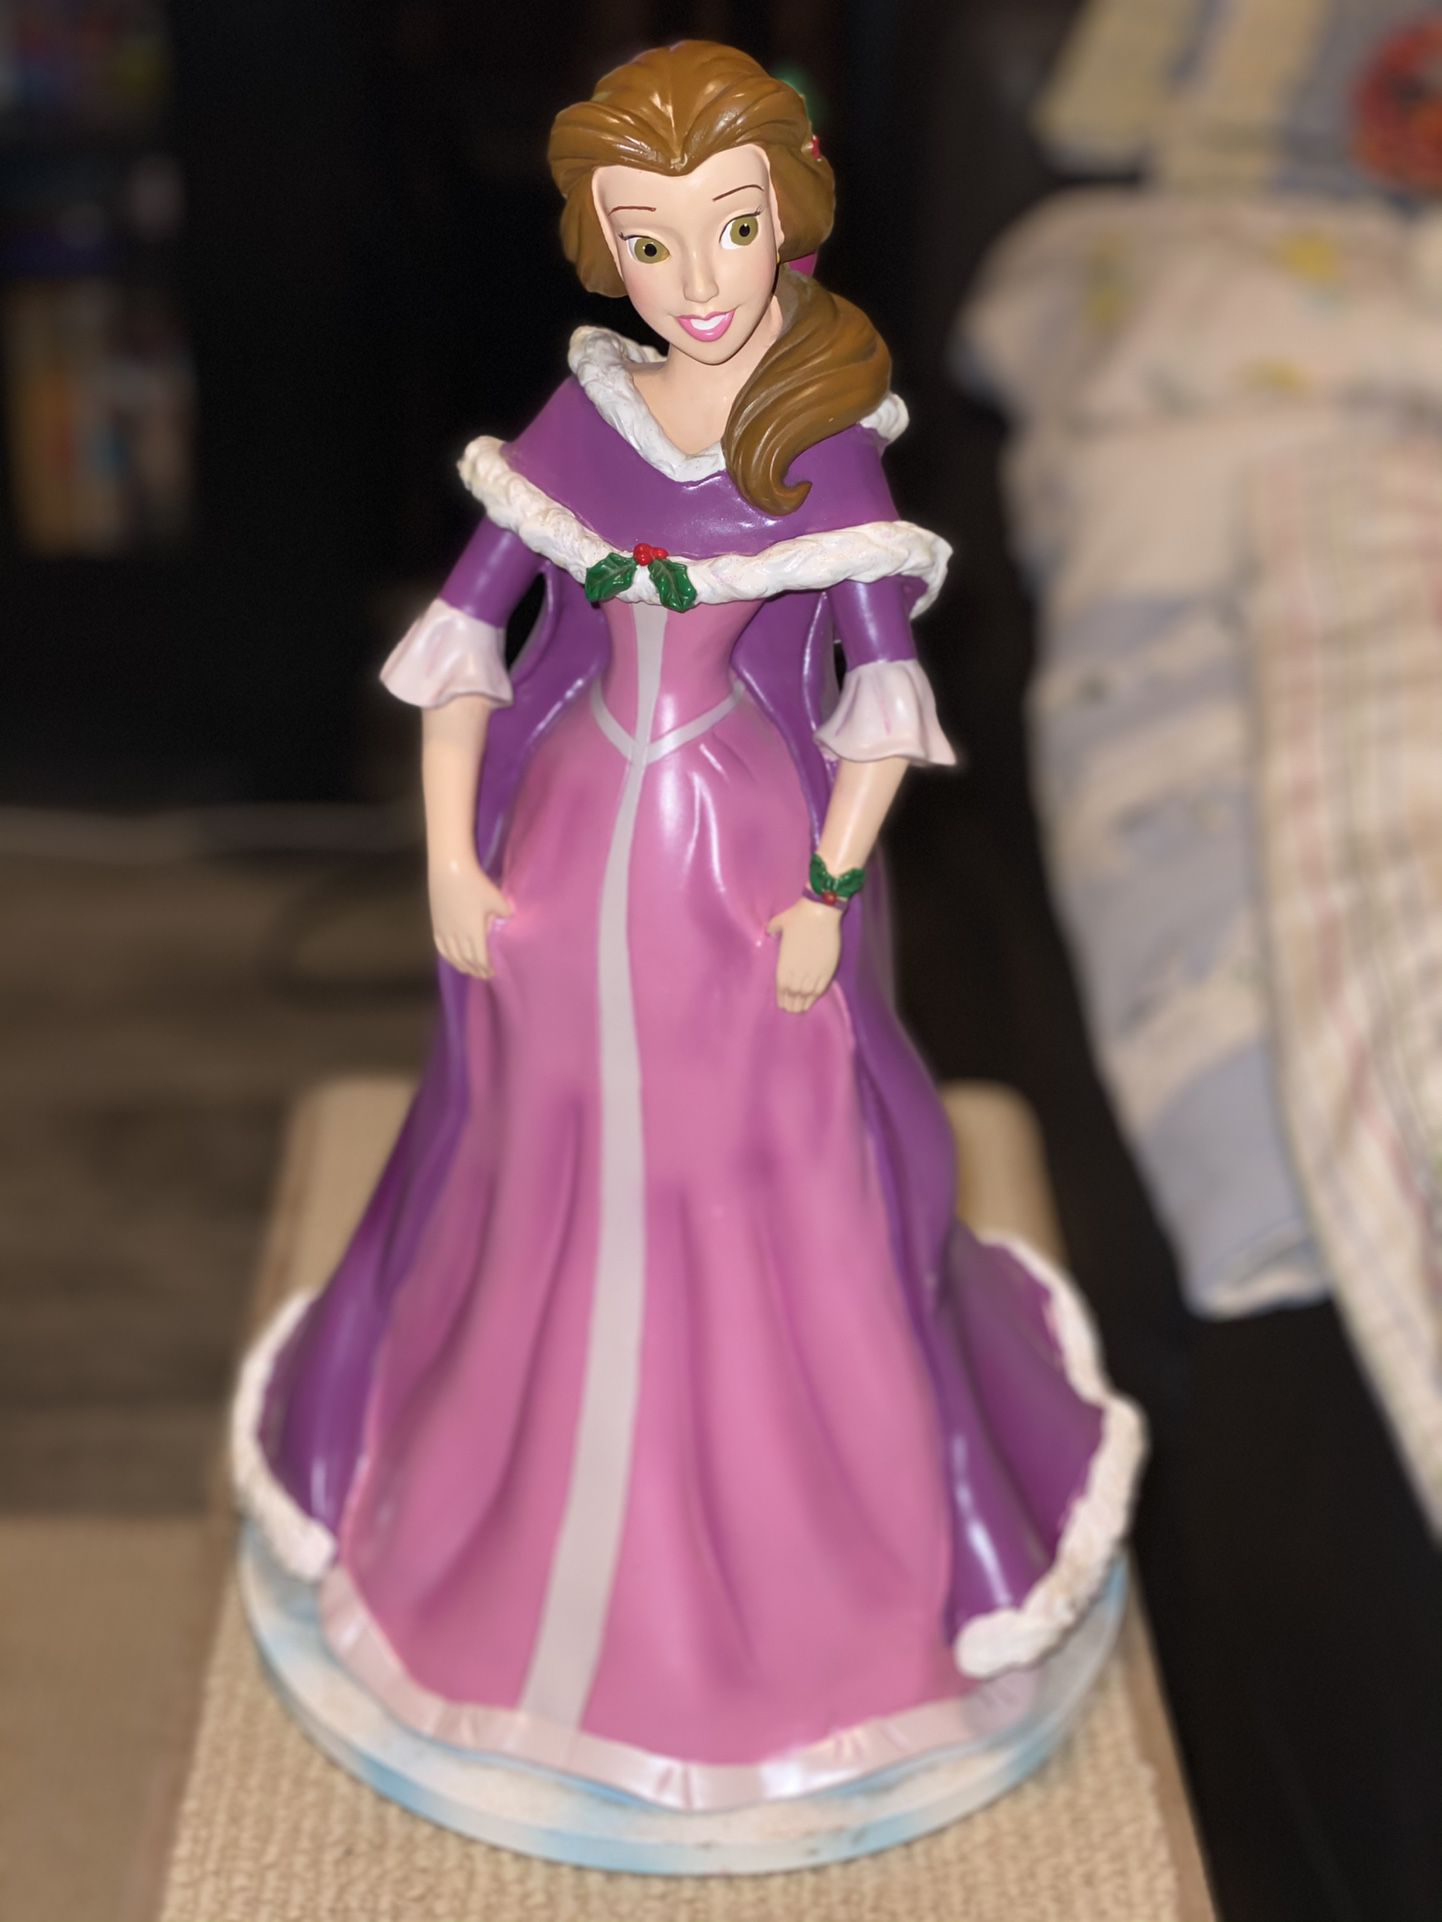 Belle, Beauty And The Beast , 14.5” Tall Figurine, $80 Base Is 8” Across, Glitter Accents